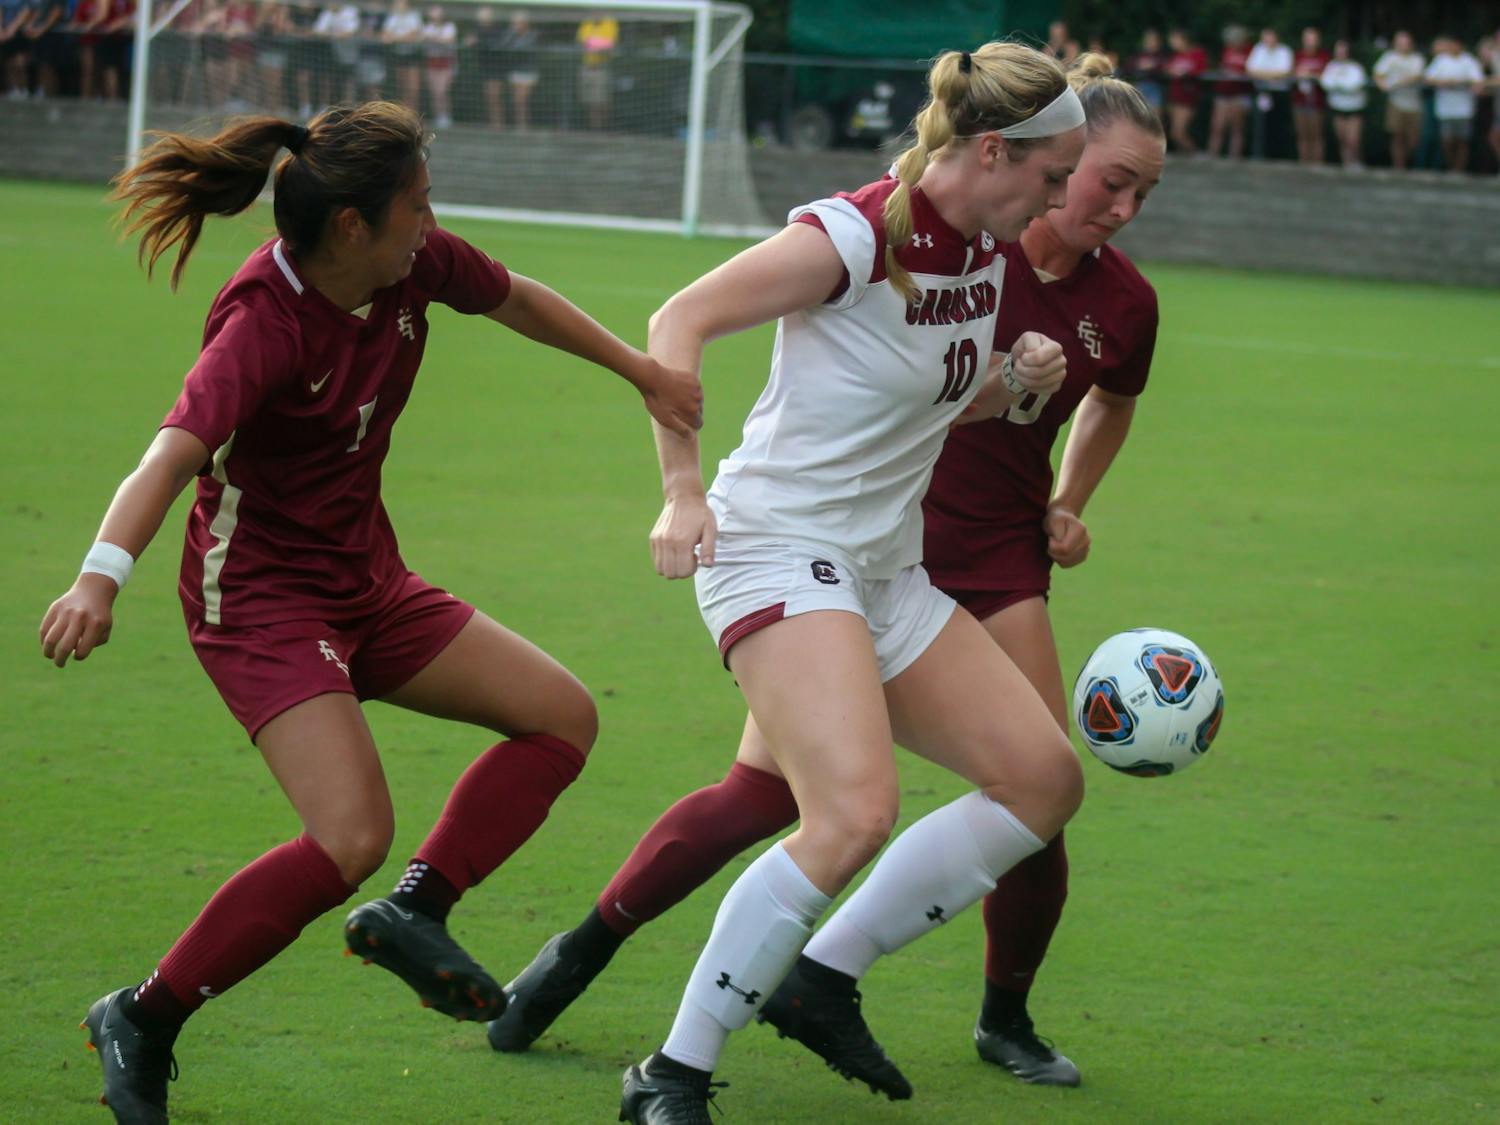 Junior forward Catherine Berry fights off defenders in pursuit of a goal during a women's soccer game Thursday afternoon, August 18, 2022. USC tied against FSU 0-0.